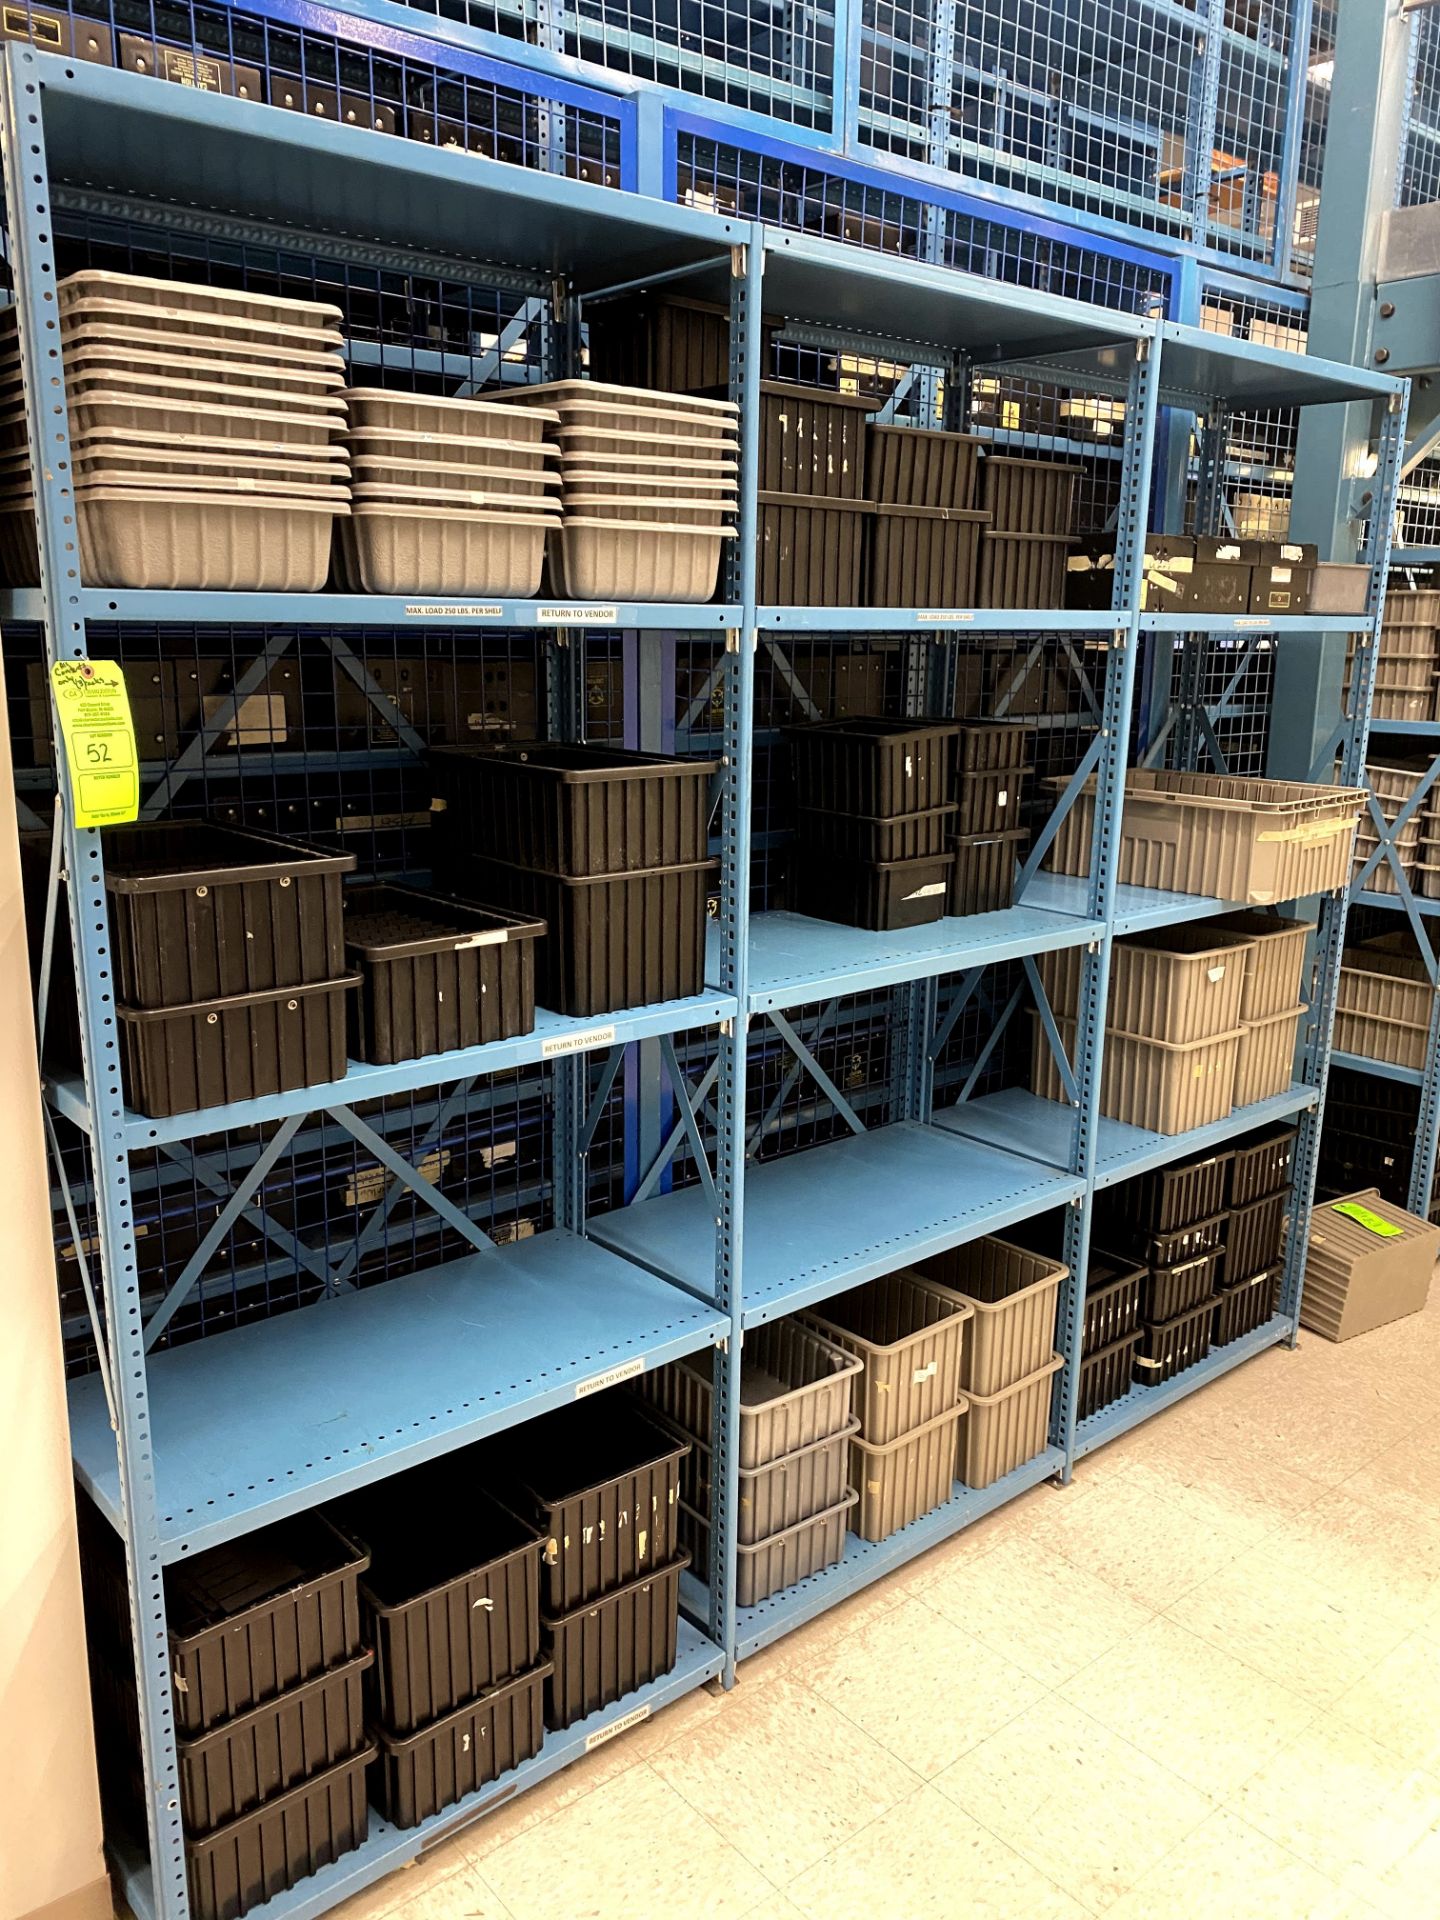 (ALL) VARIOUS SIZE MATERIAL STORAGE TUB(S) -- (7625 OMNITECH PLACE VICTOR NEW YORK)